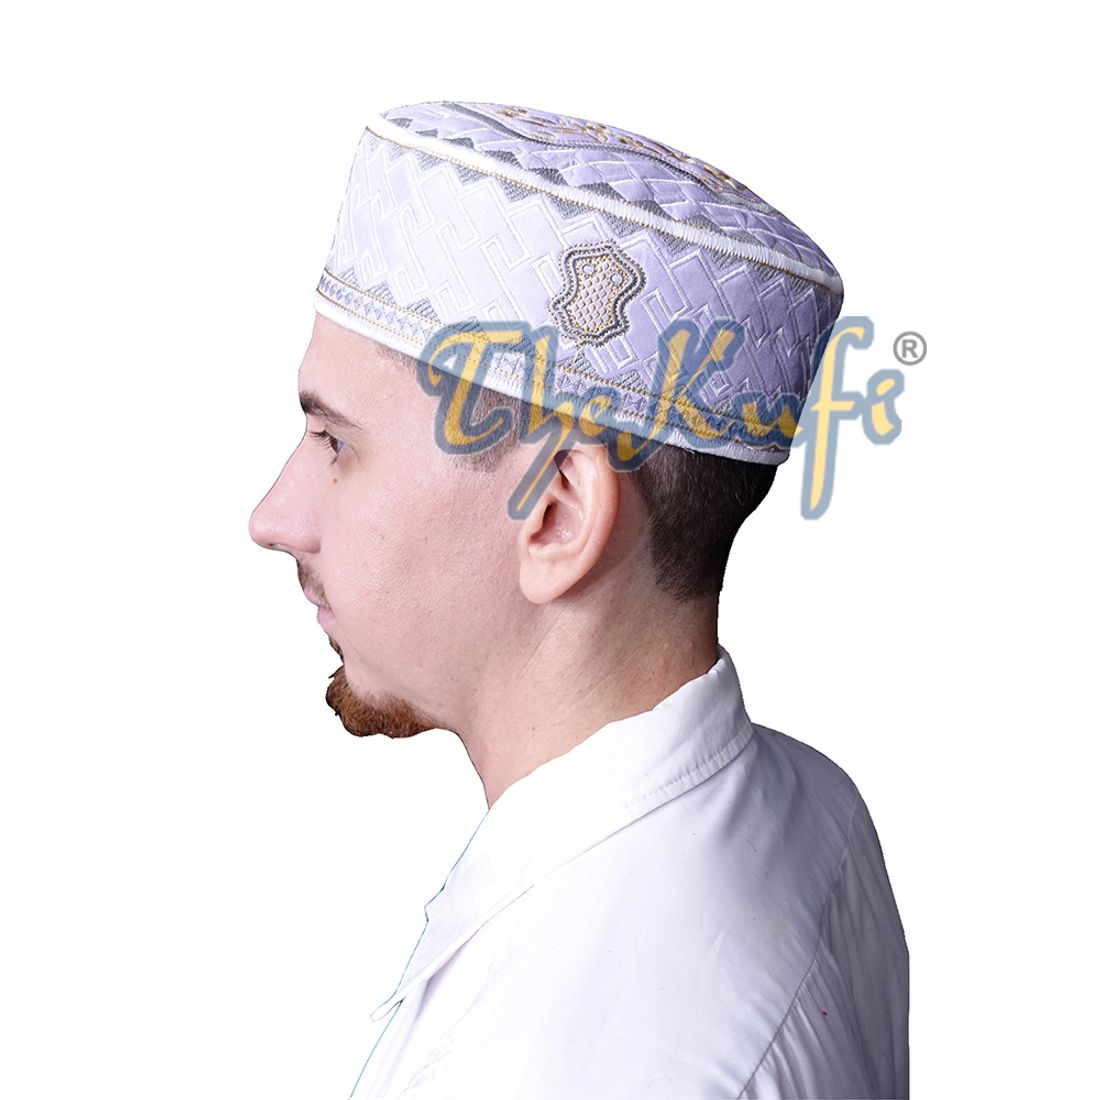 Prophet Muhammad Sandal Design Kufi Textured White Gray and Golden Ivory Embroidery